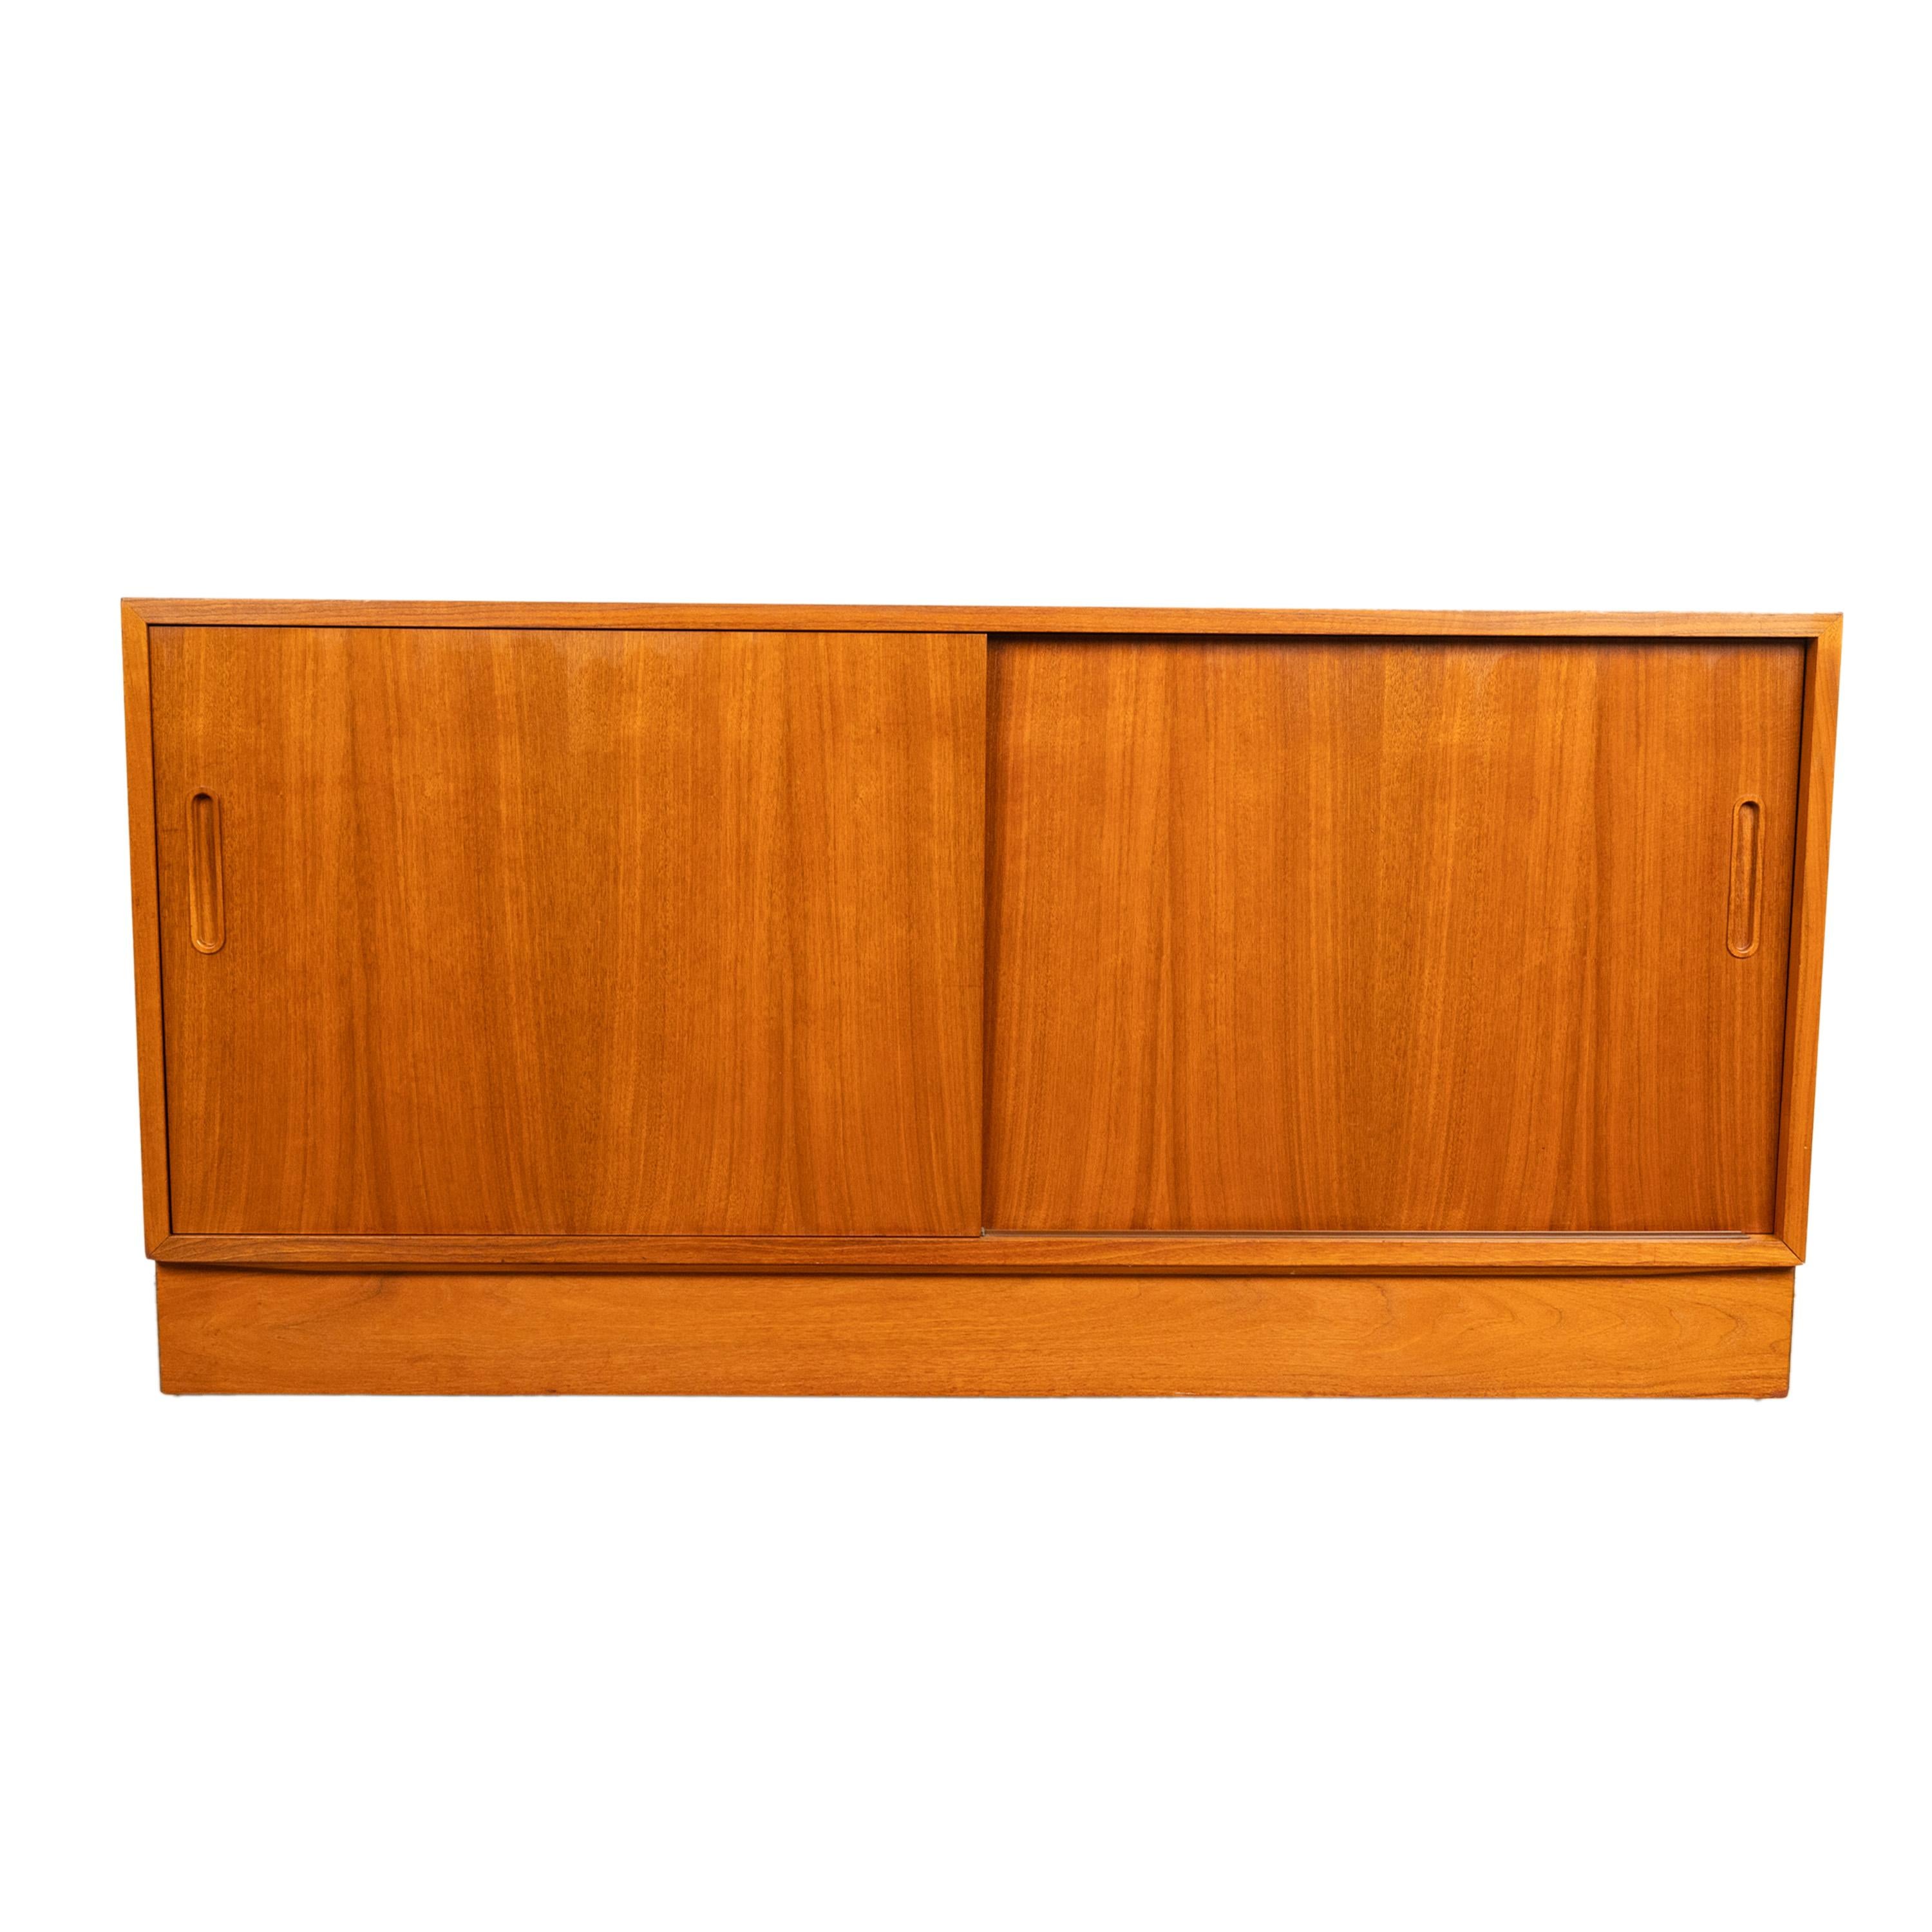 Mid Century Modern Danish teak credenza, sideboard, cabinet, designed by Poul Hundevad (1917-2011) , circa 1970.

Poul Hundevad (1917-2011) was a Danish furniture designer known for his elegant and functional designs. He was born in Denmark and